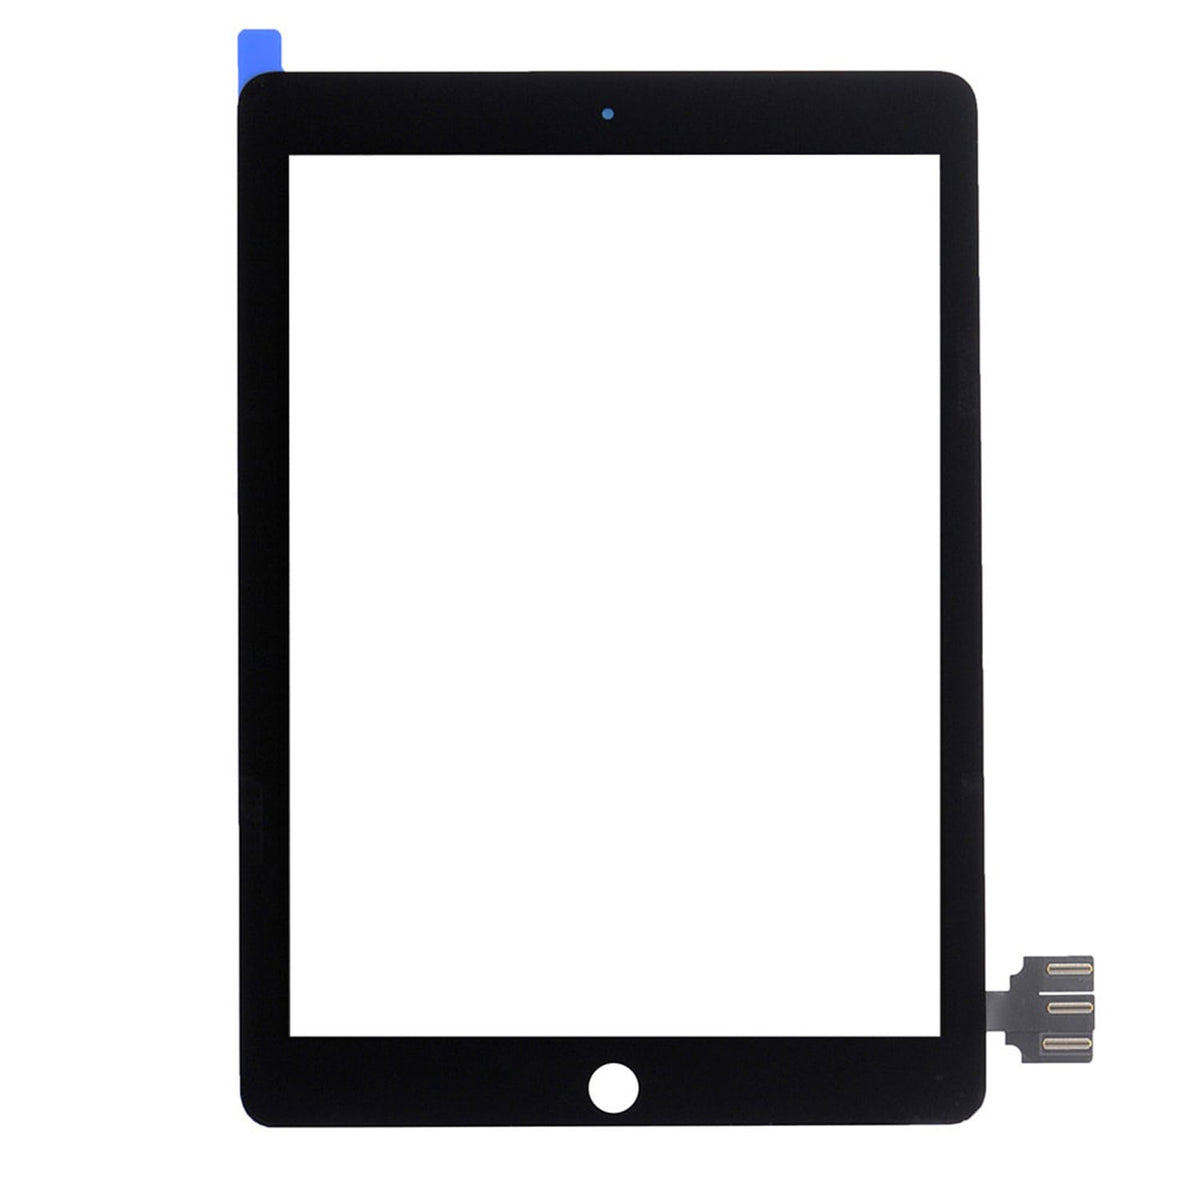 TOUCH SCREEN DIGITIZER FOR IPAD PRO 9.7"- BLACK